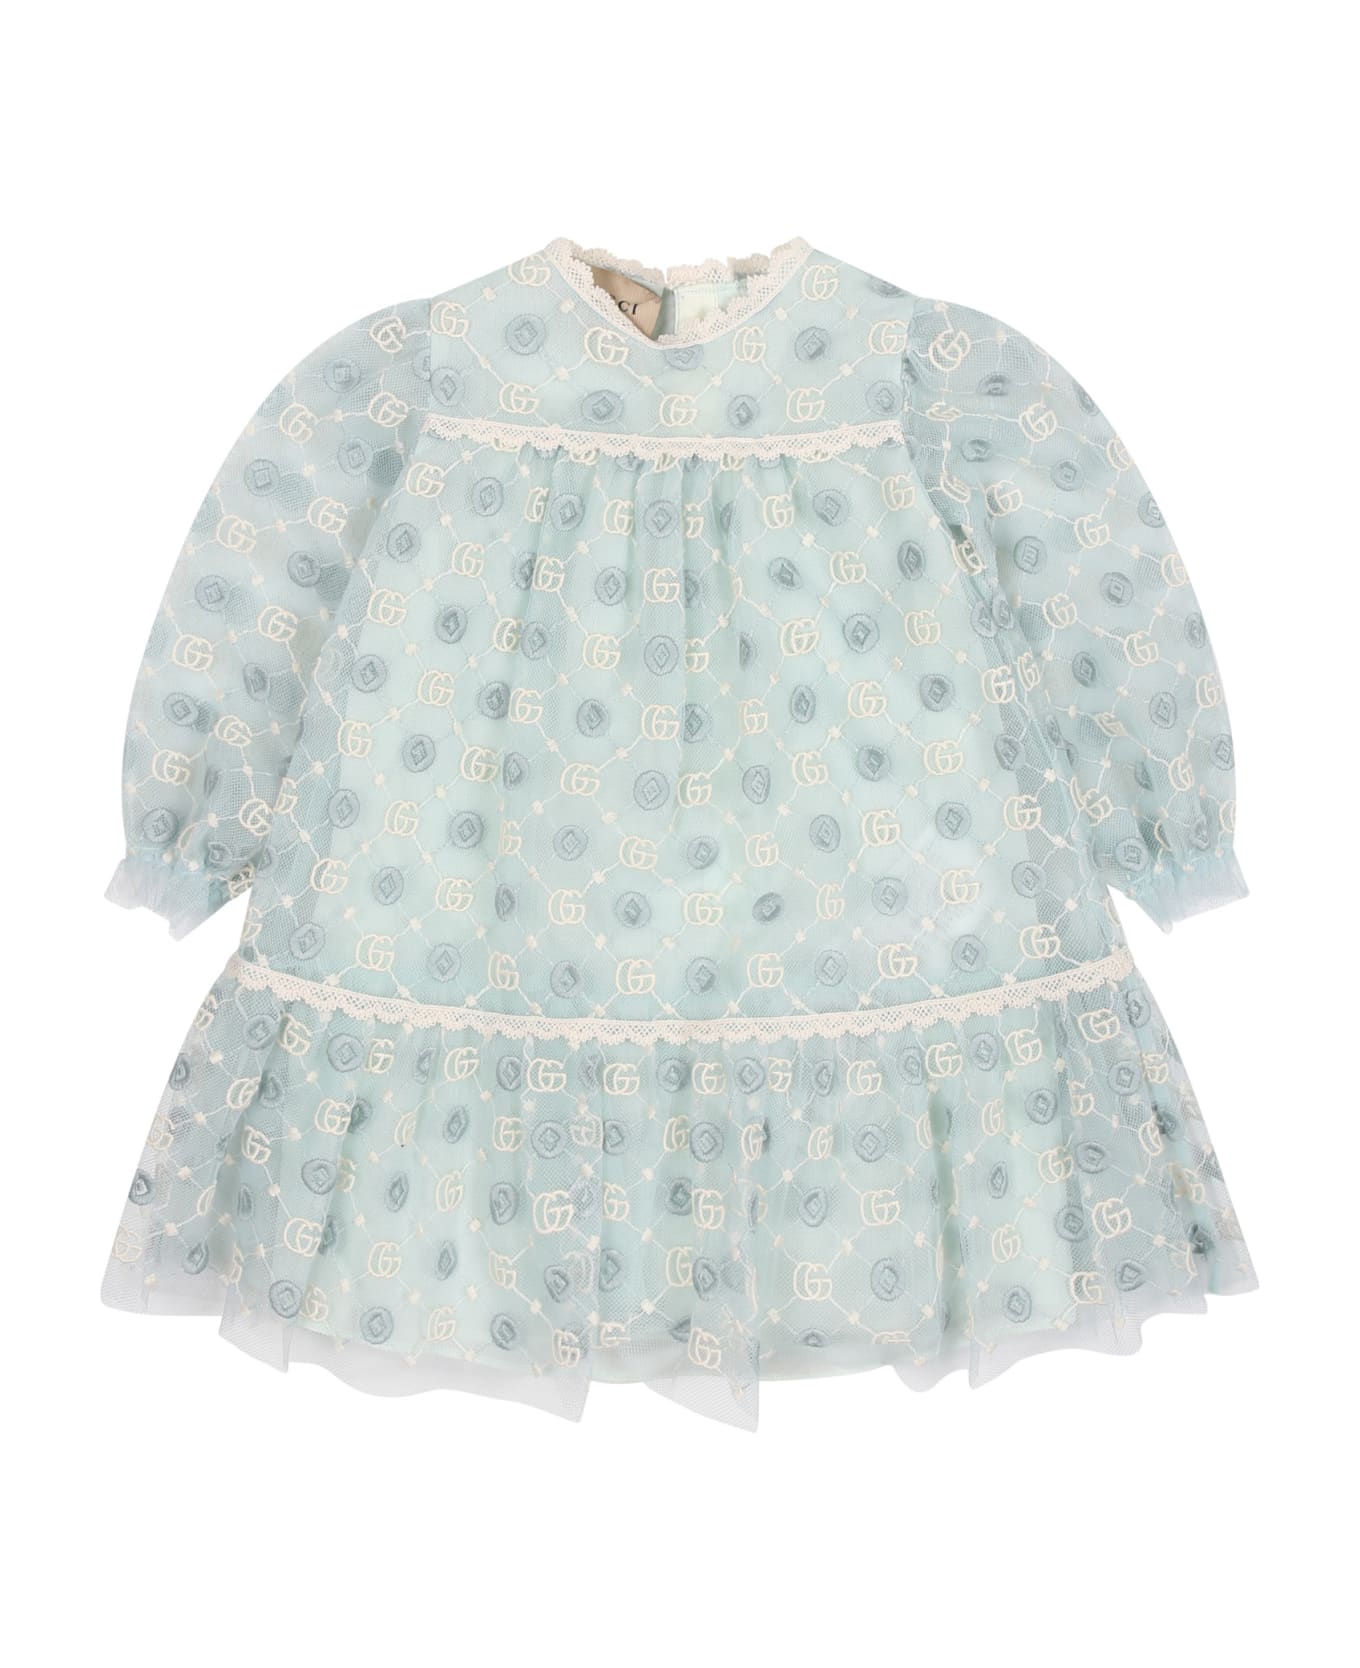 Gucci Red Light Blue Dress For Baby Girl With Geometric Pattern And Double G - Light Blue